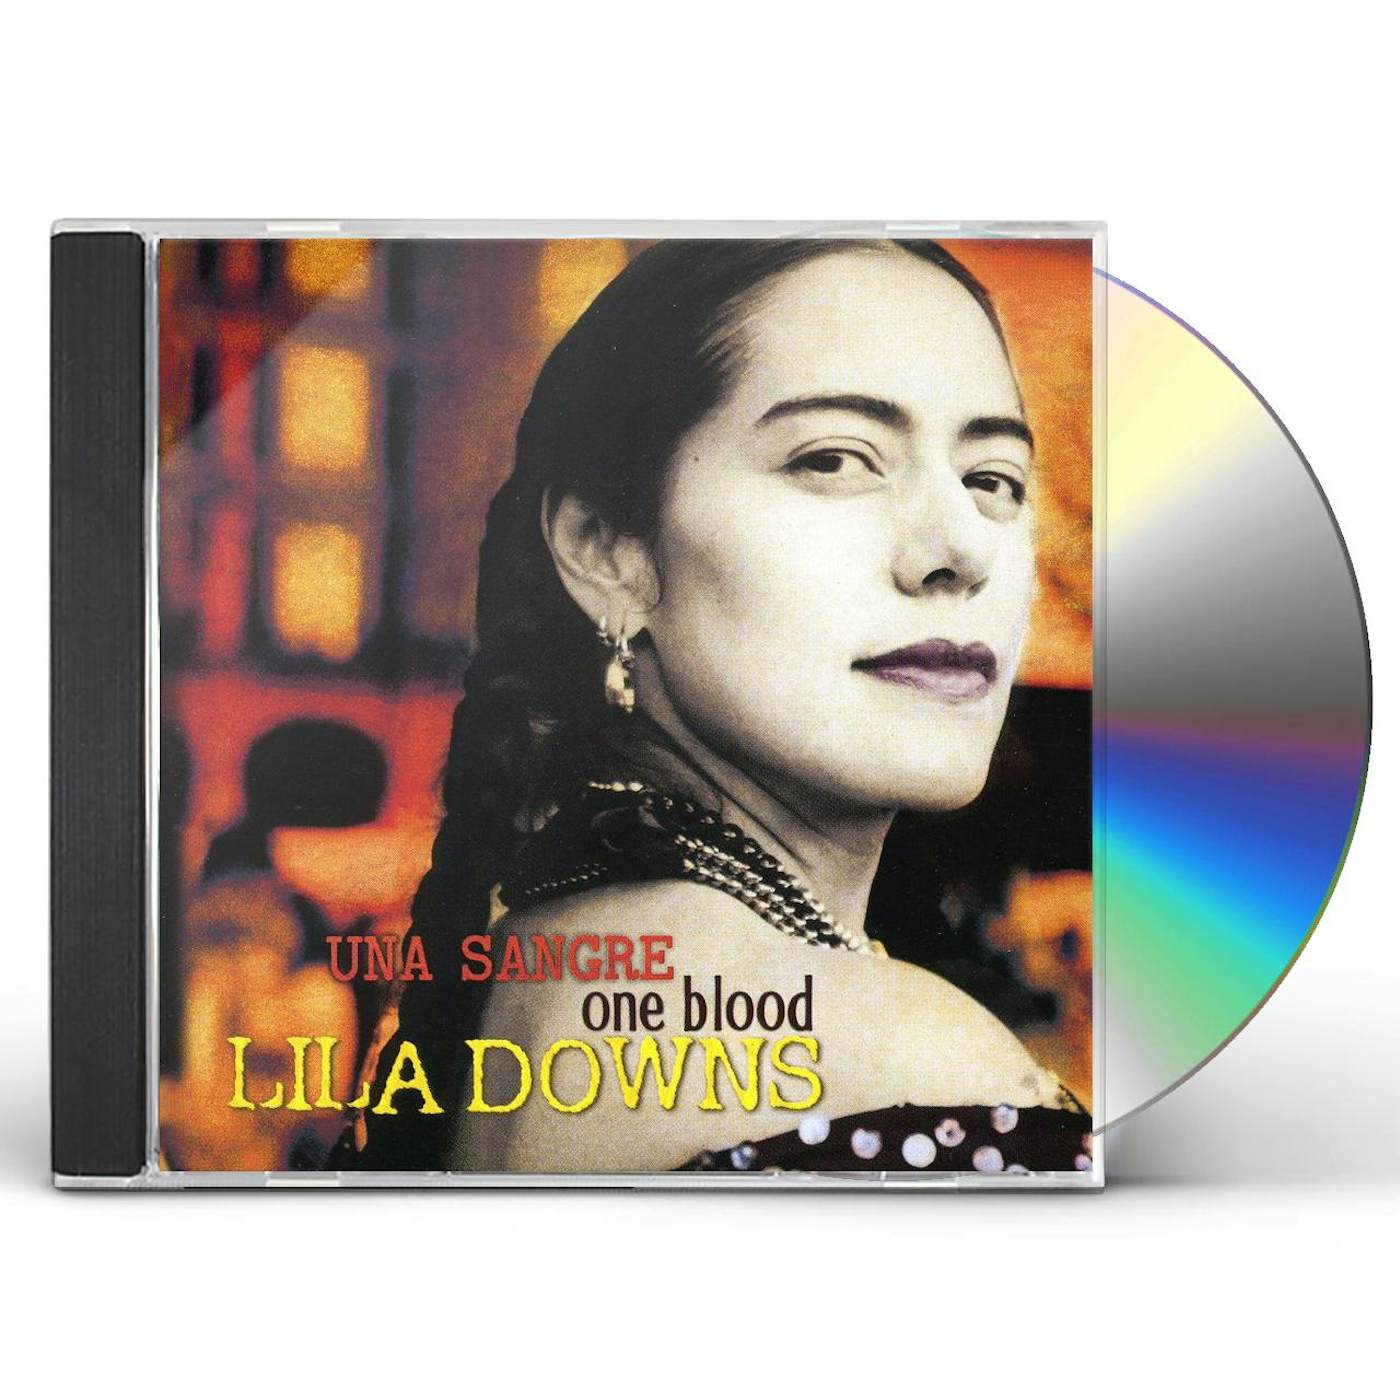 Lila Downs ONE BLOOD - UNA SANGRE CD